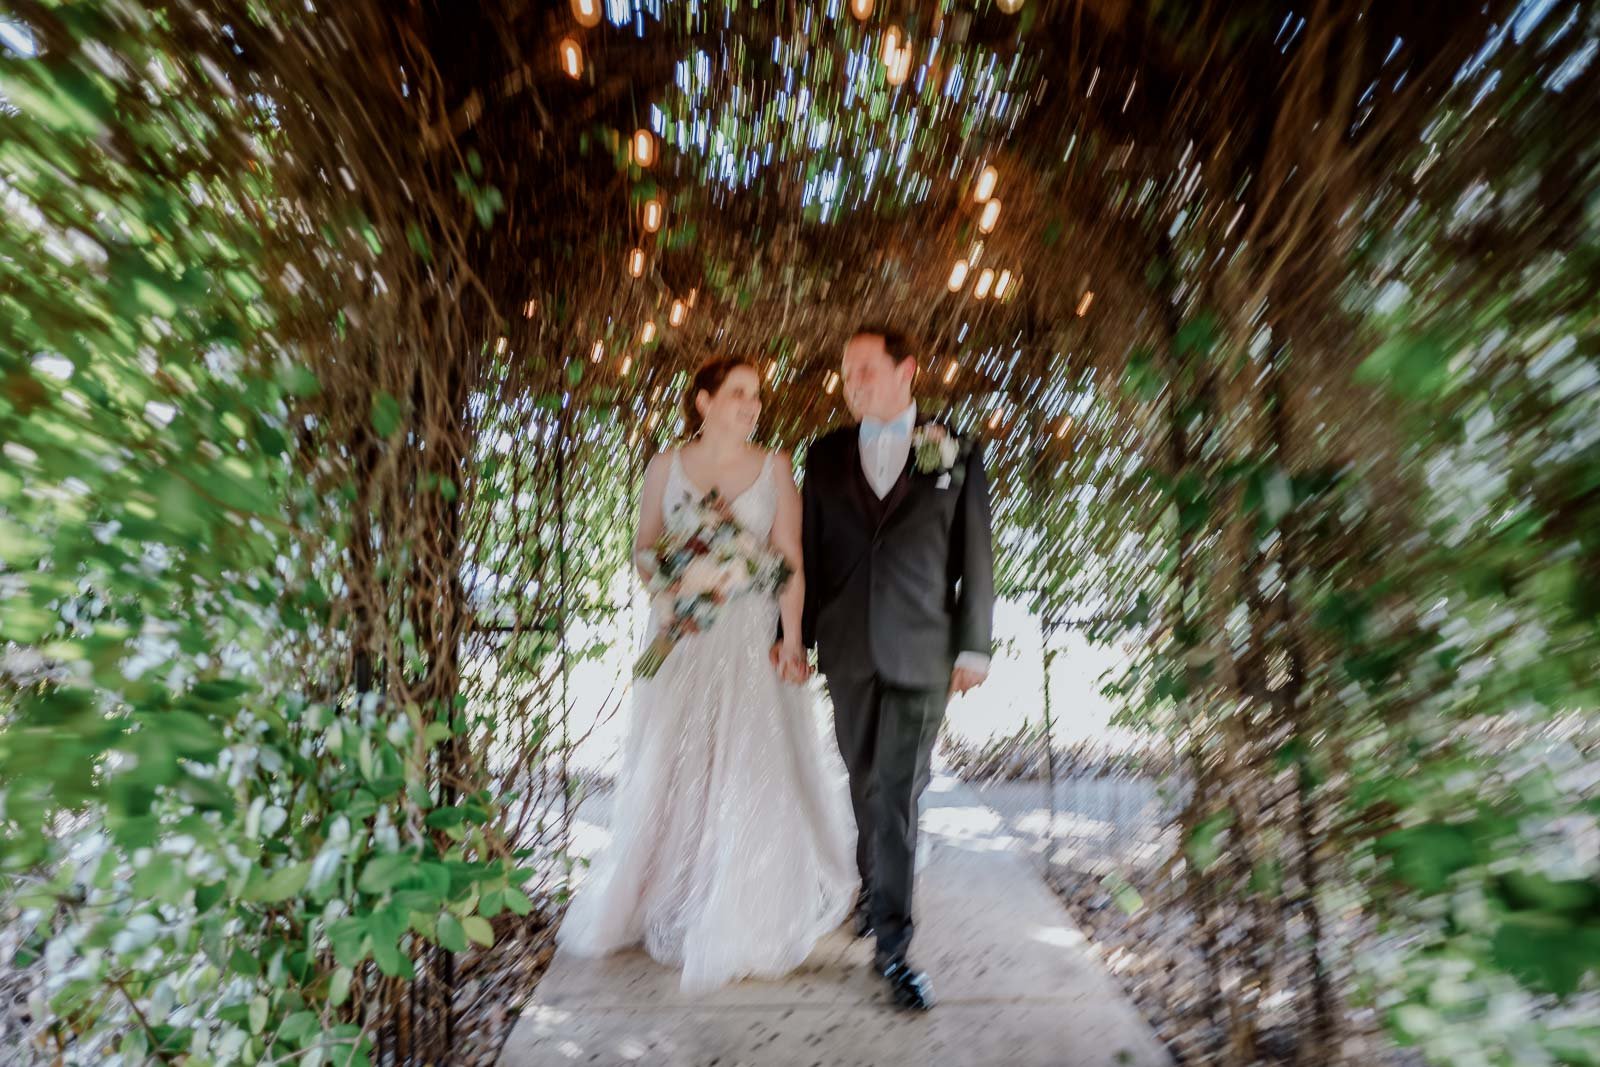 In a slow movement pan a couple walk towards the camera in a slow shutter speed at Spinellis wedding venue